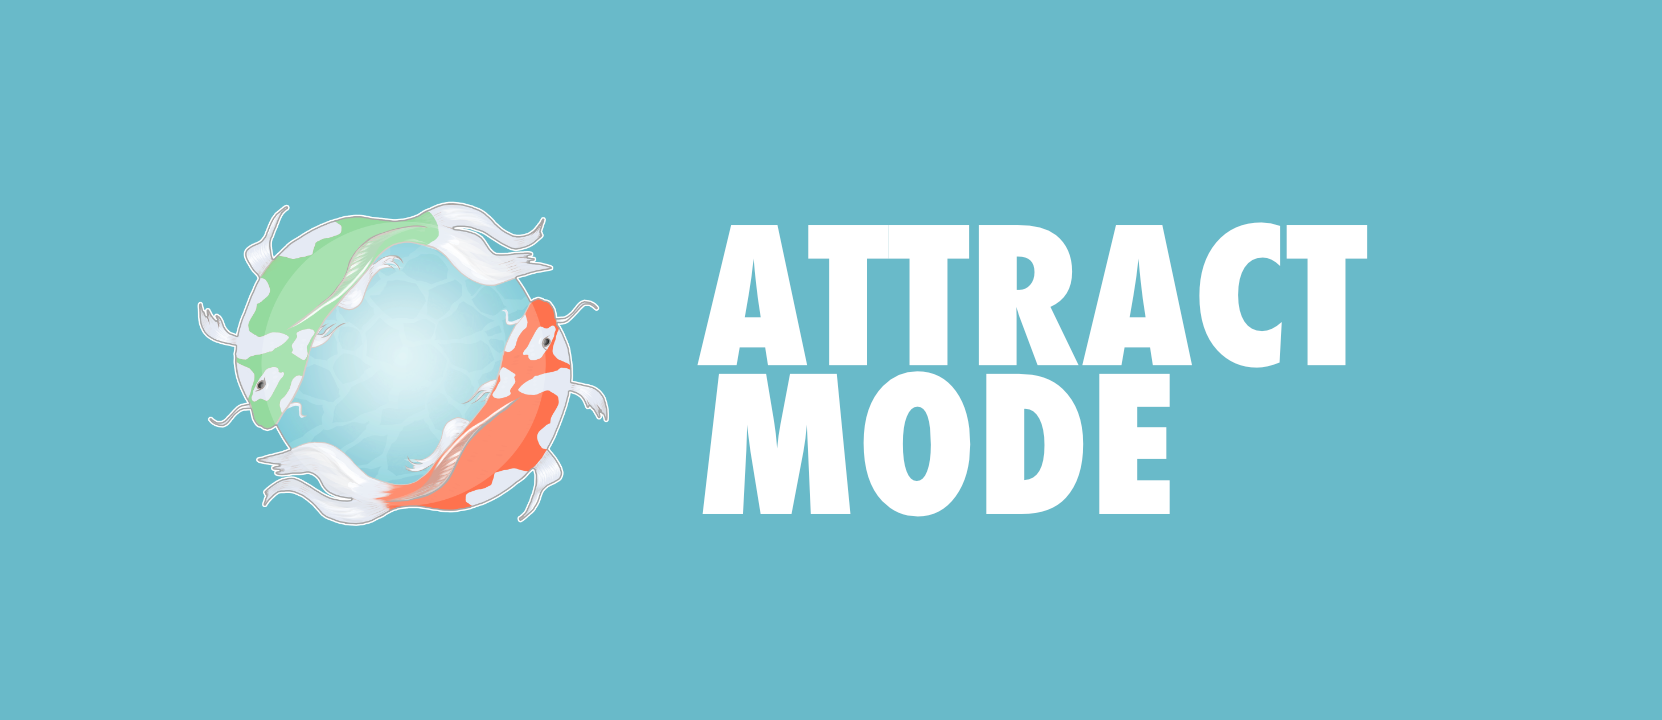 Attract Mode